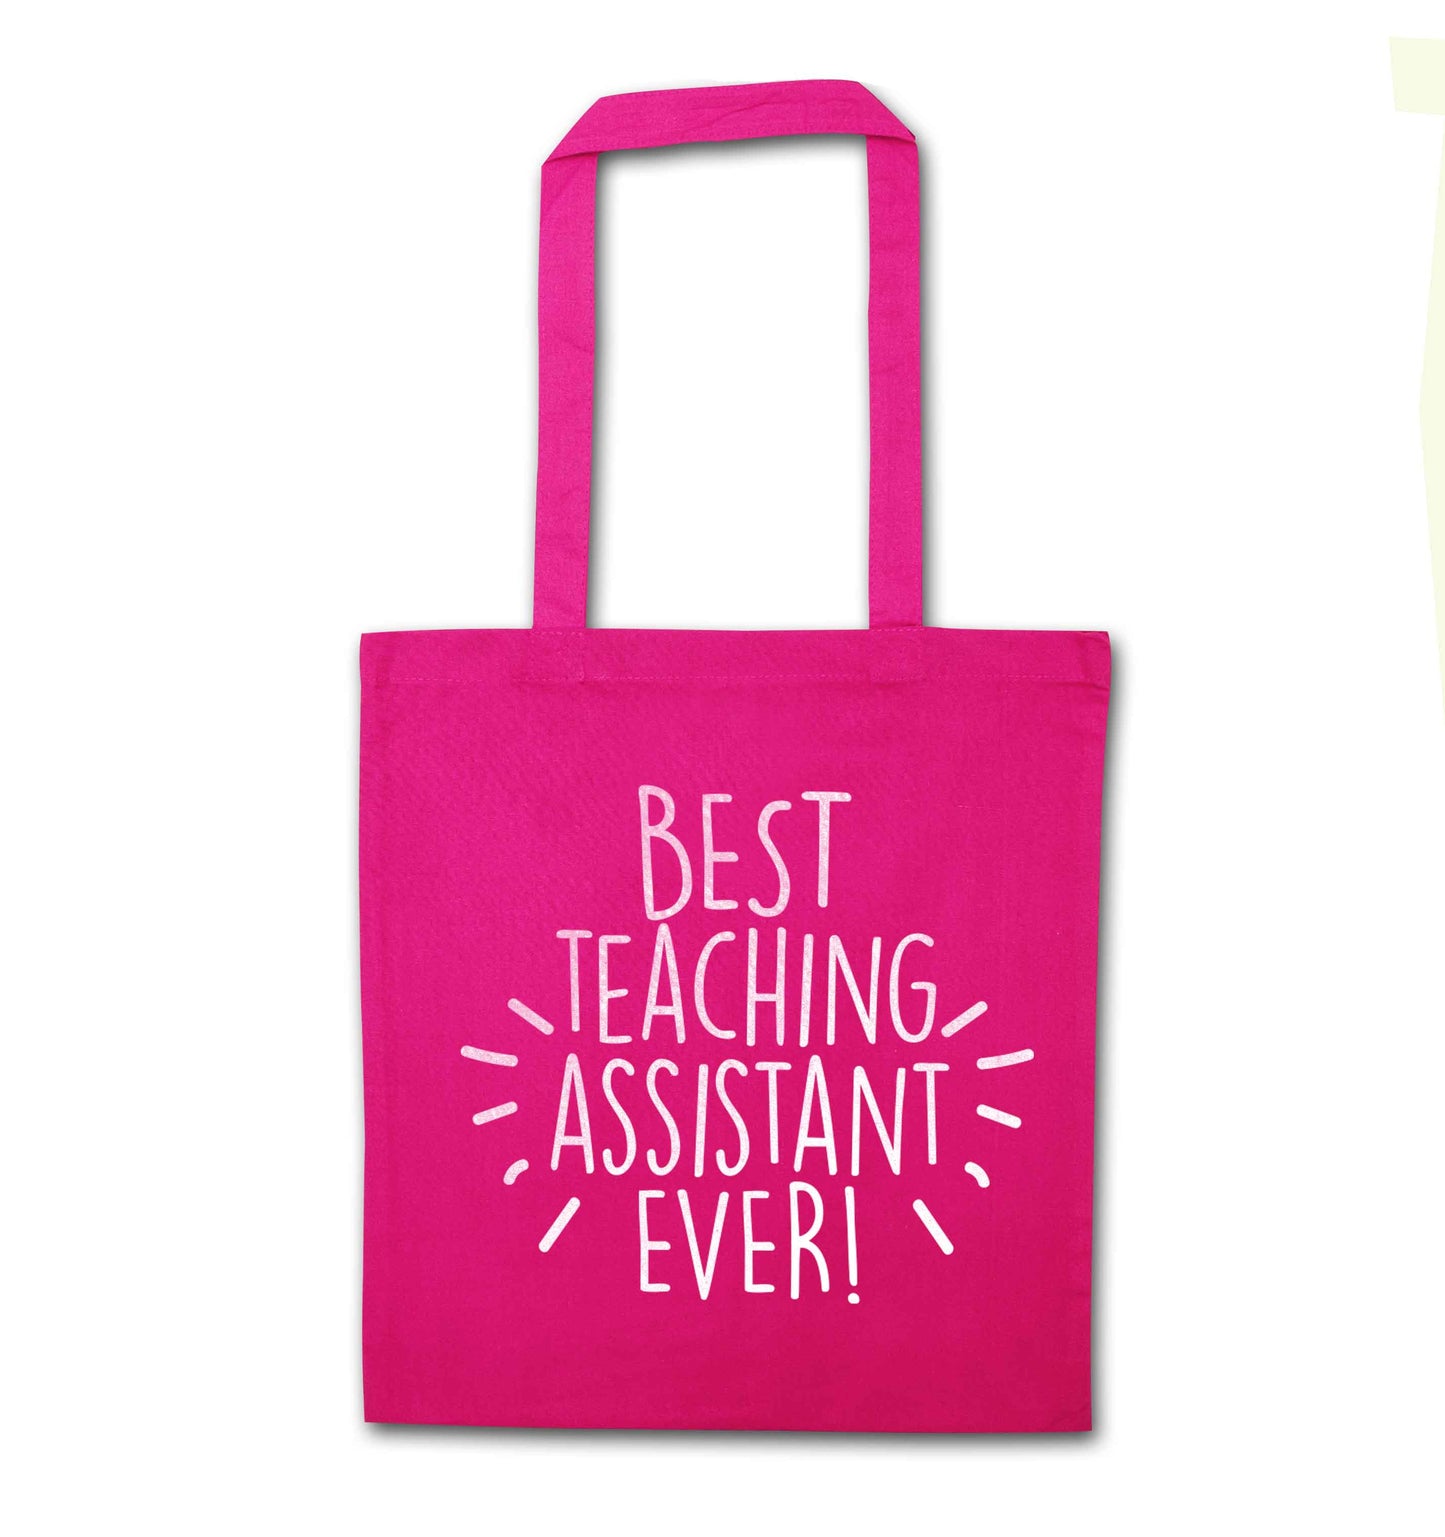 Best teaching assistant ever! pink tote bag